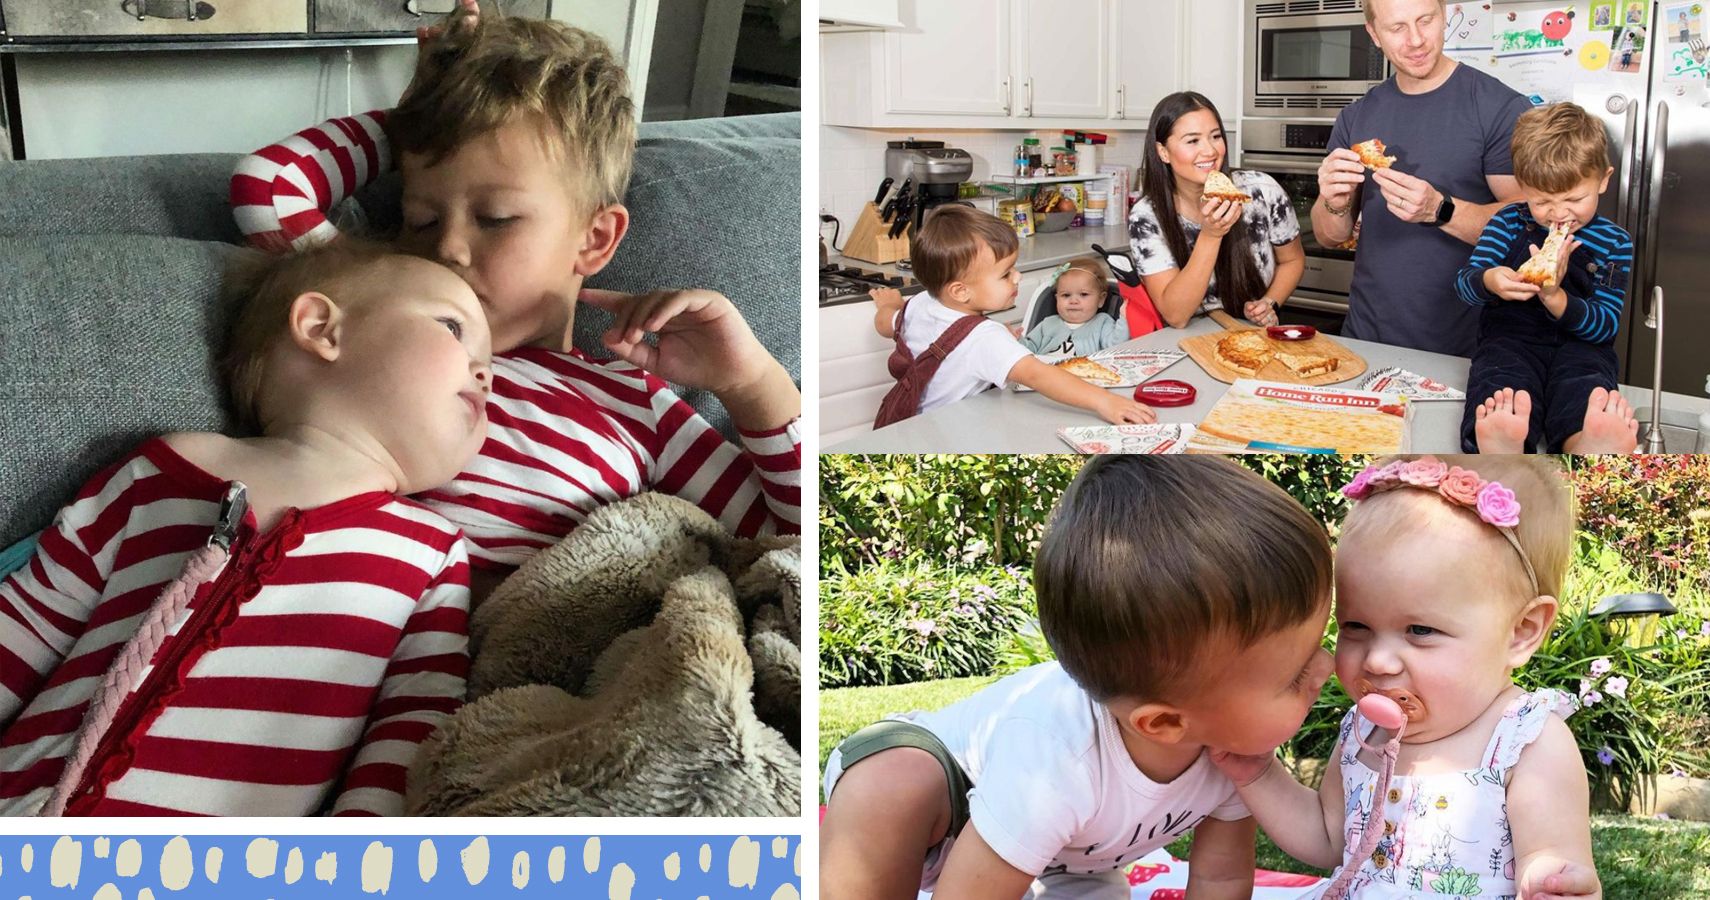 Catherine Lowe’s Instagram Is Full Of Happy Family Moments